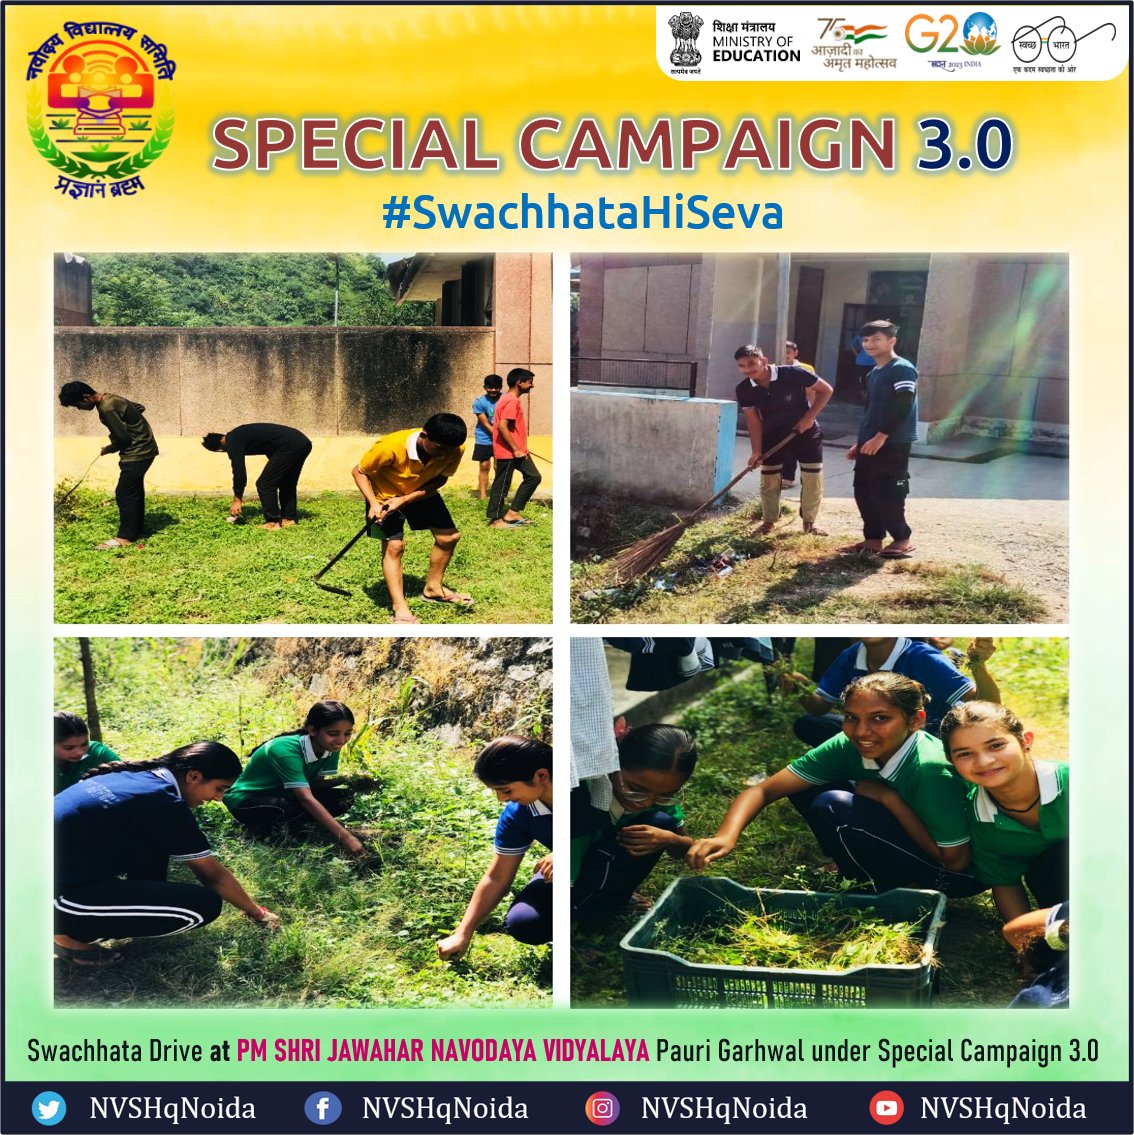 Fostering the spirit of #SwachhtaHiSeva !!

A Swachhata Drive was organized at PM SHRI Jawahar Navodaya Vidyalaya, Pauri Garhwal under the aegis of #SpecialCampaign3.

Let's keep our surroundings cleaner for a healthier tomorrow.

#SwachhBharat #SwachhataCampaign #SHS2023 #JNV